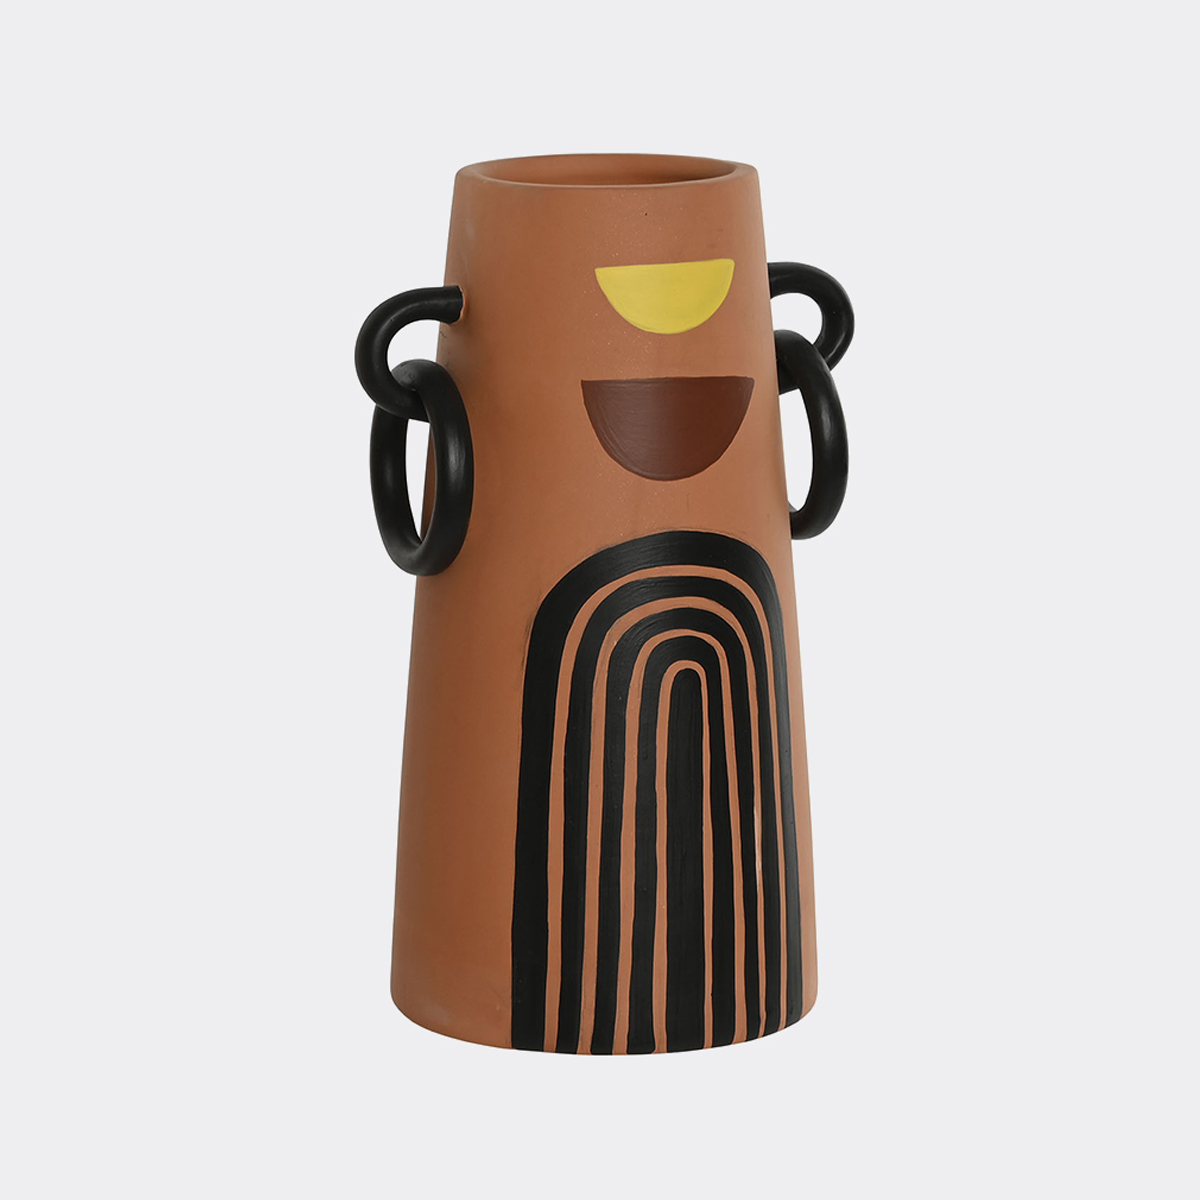 pura-cal-painted-terracotta-vase-with-ethnic-motifs-in-black